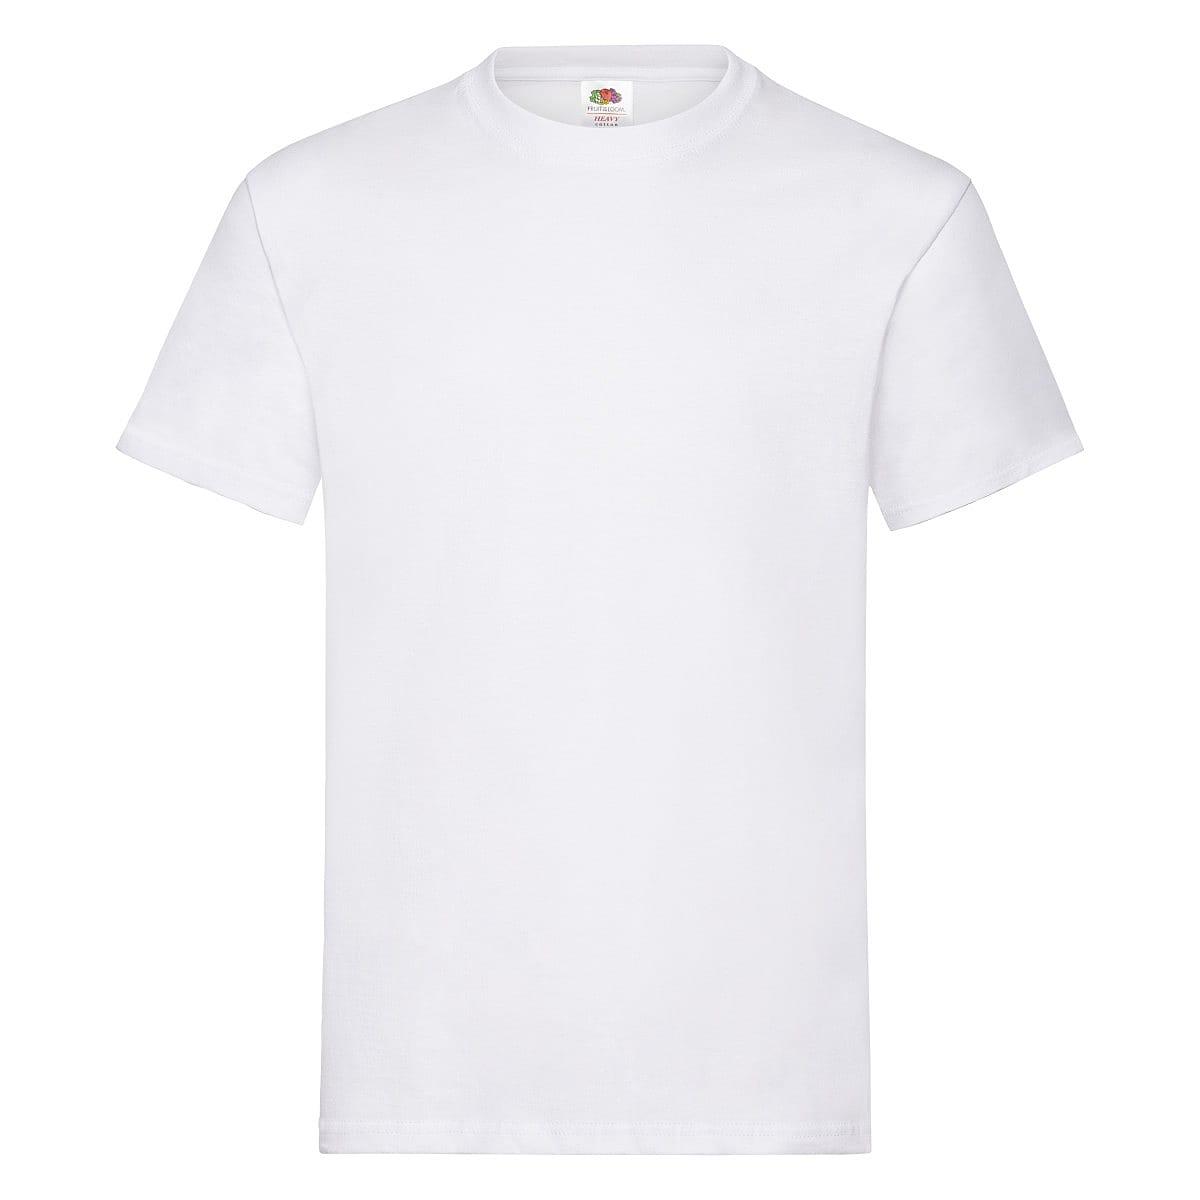 Fruit Of The Loom Heavy Cotton T-Shirt in White (Product Code: 61212)